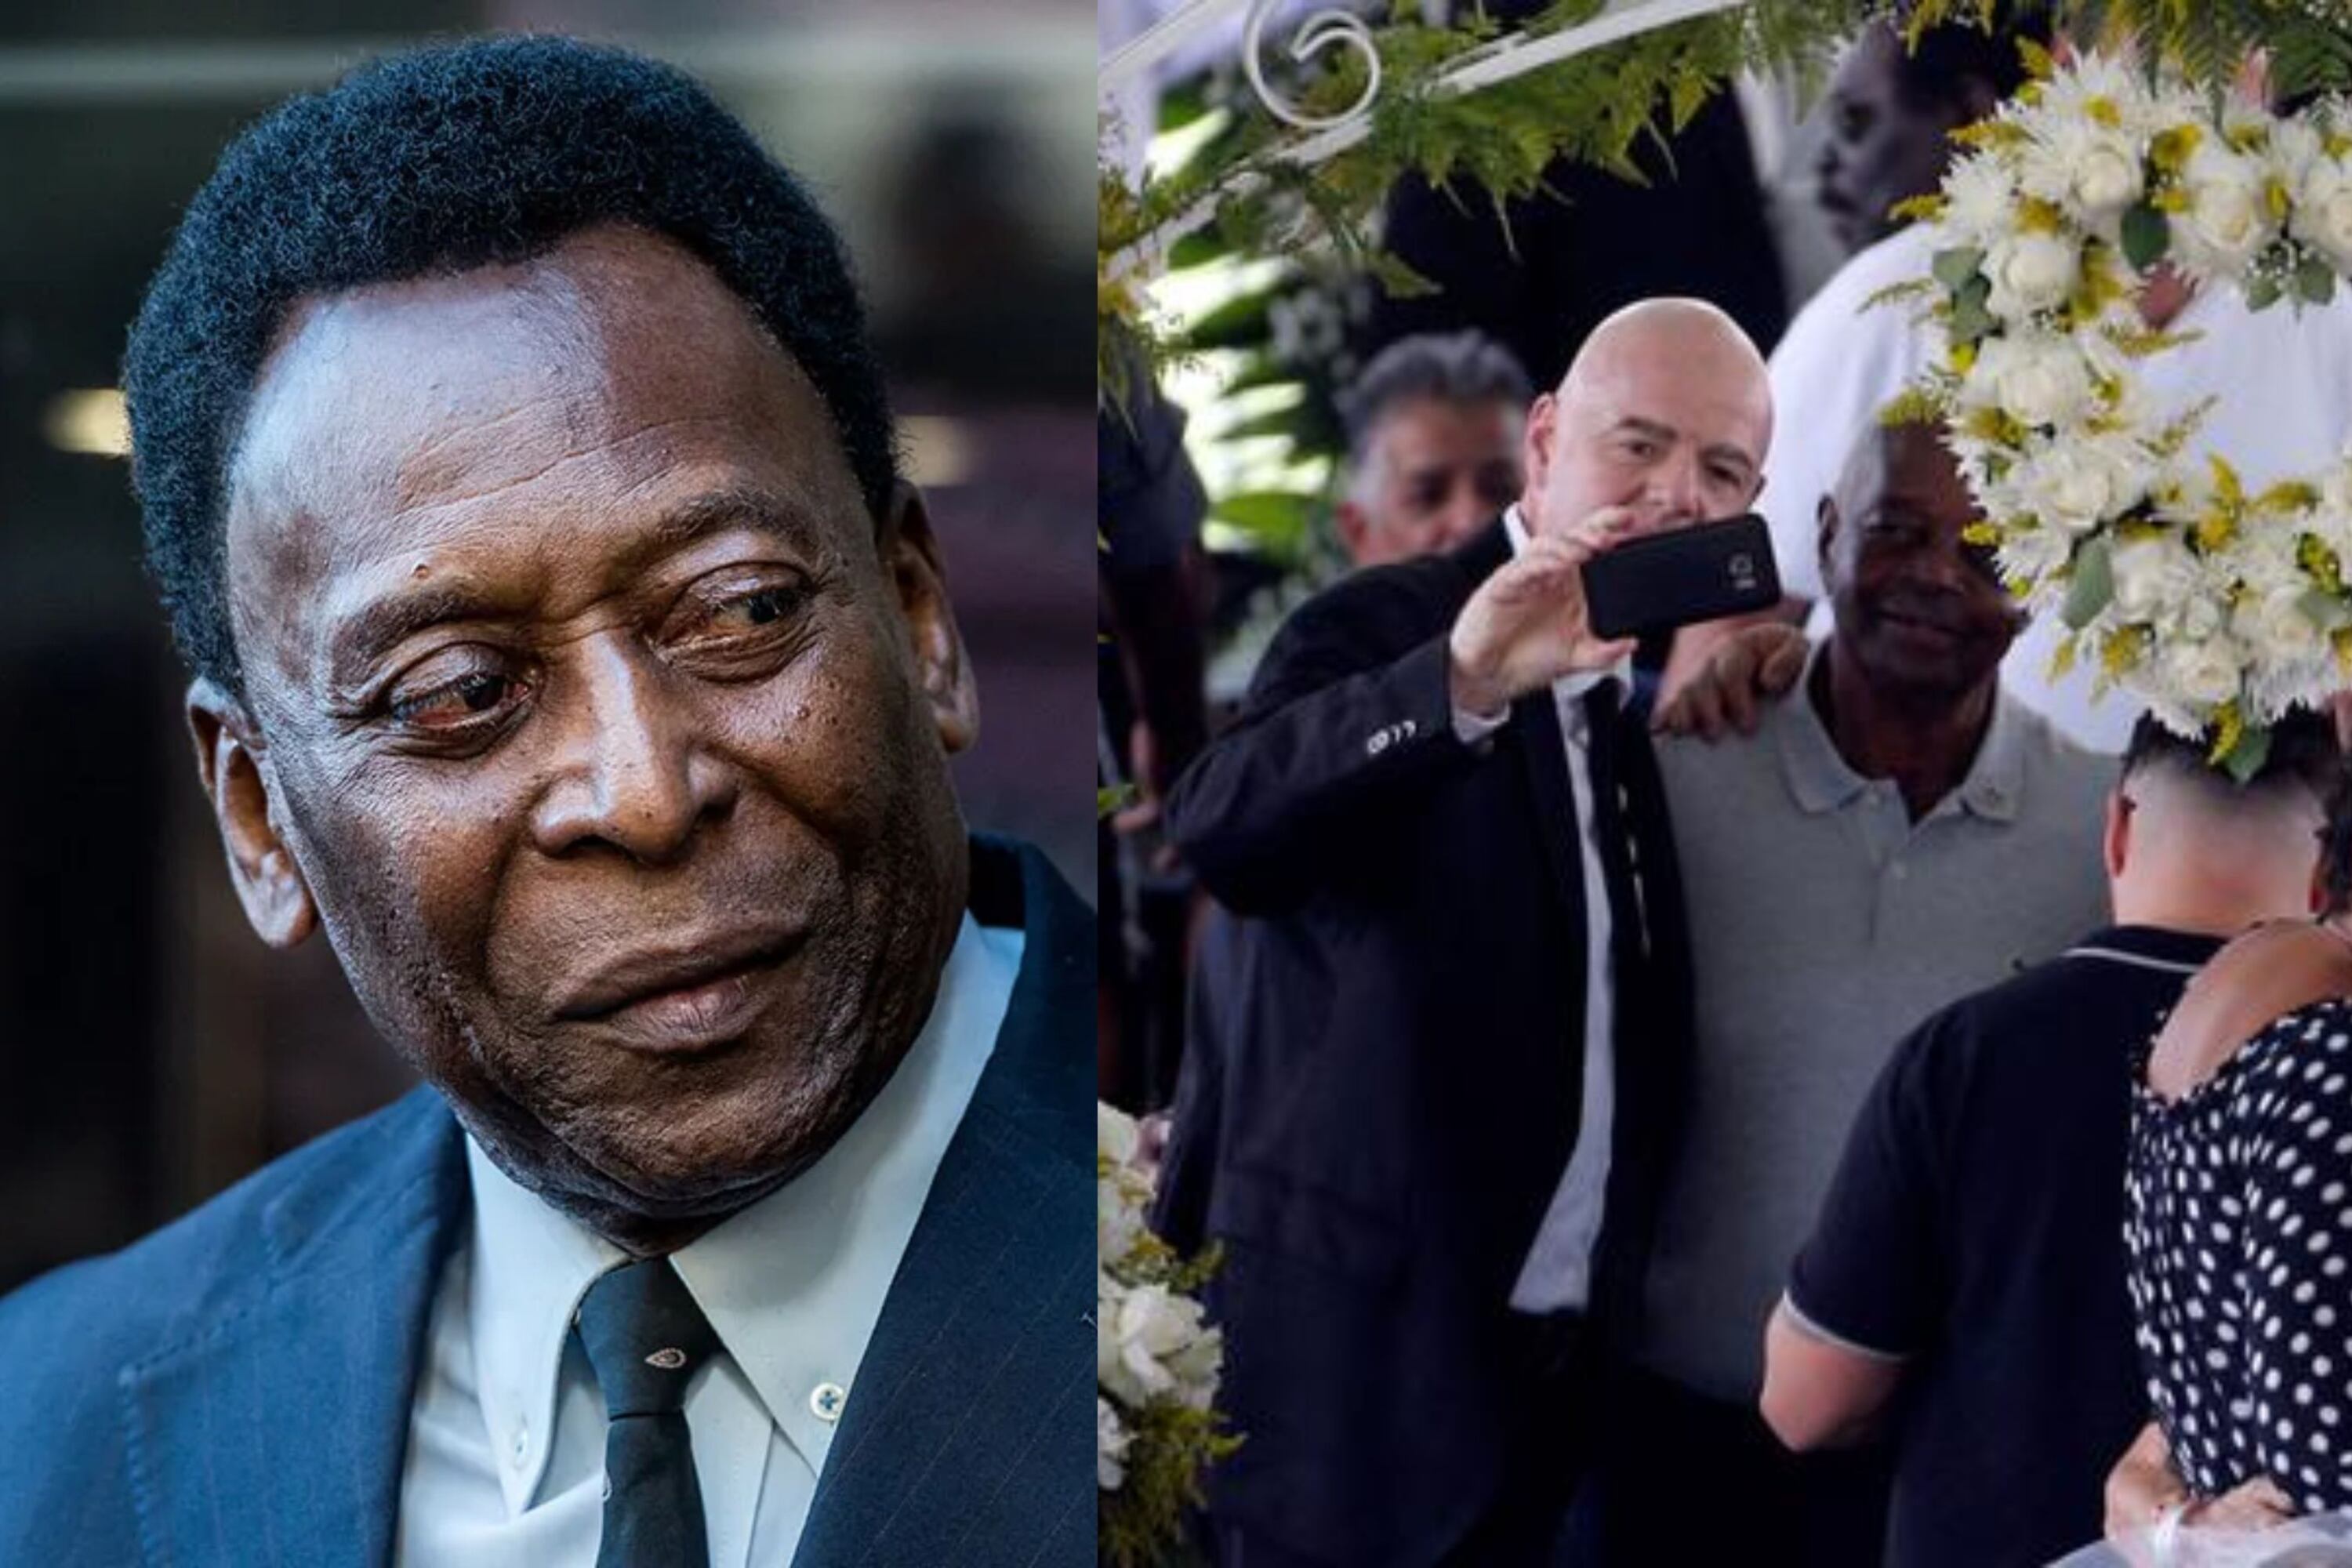 While he is critic with Mexico behaviour, what Infantino did at Pelé's wake in Brazil